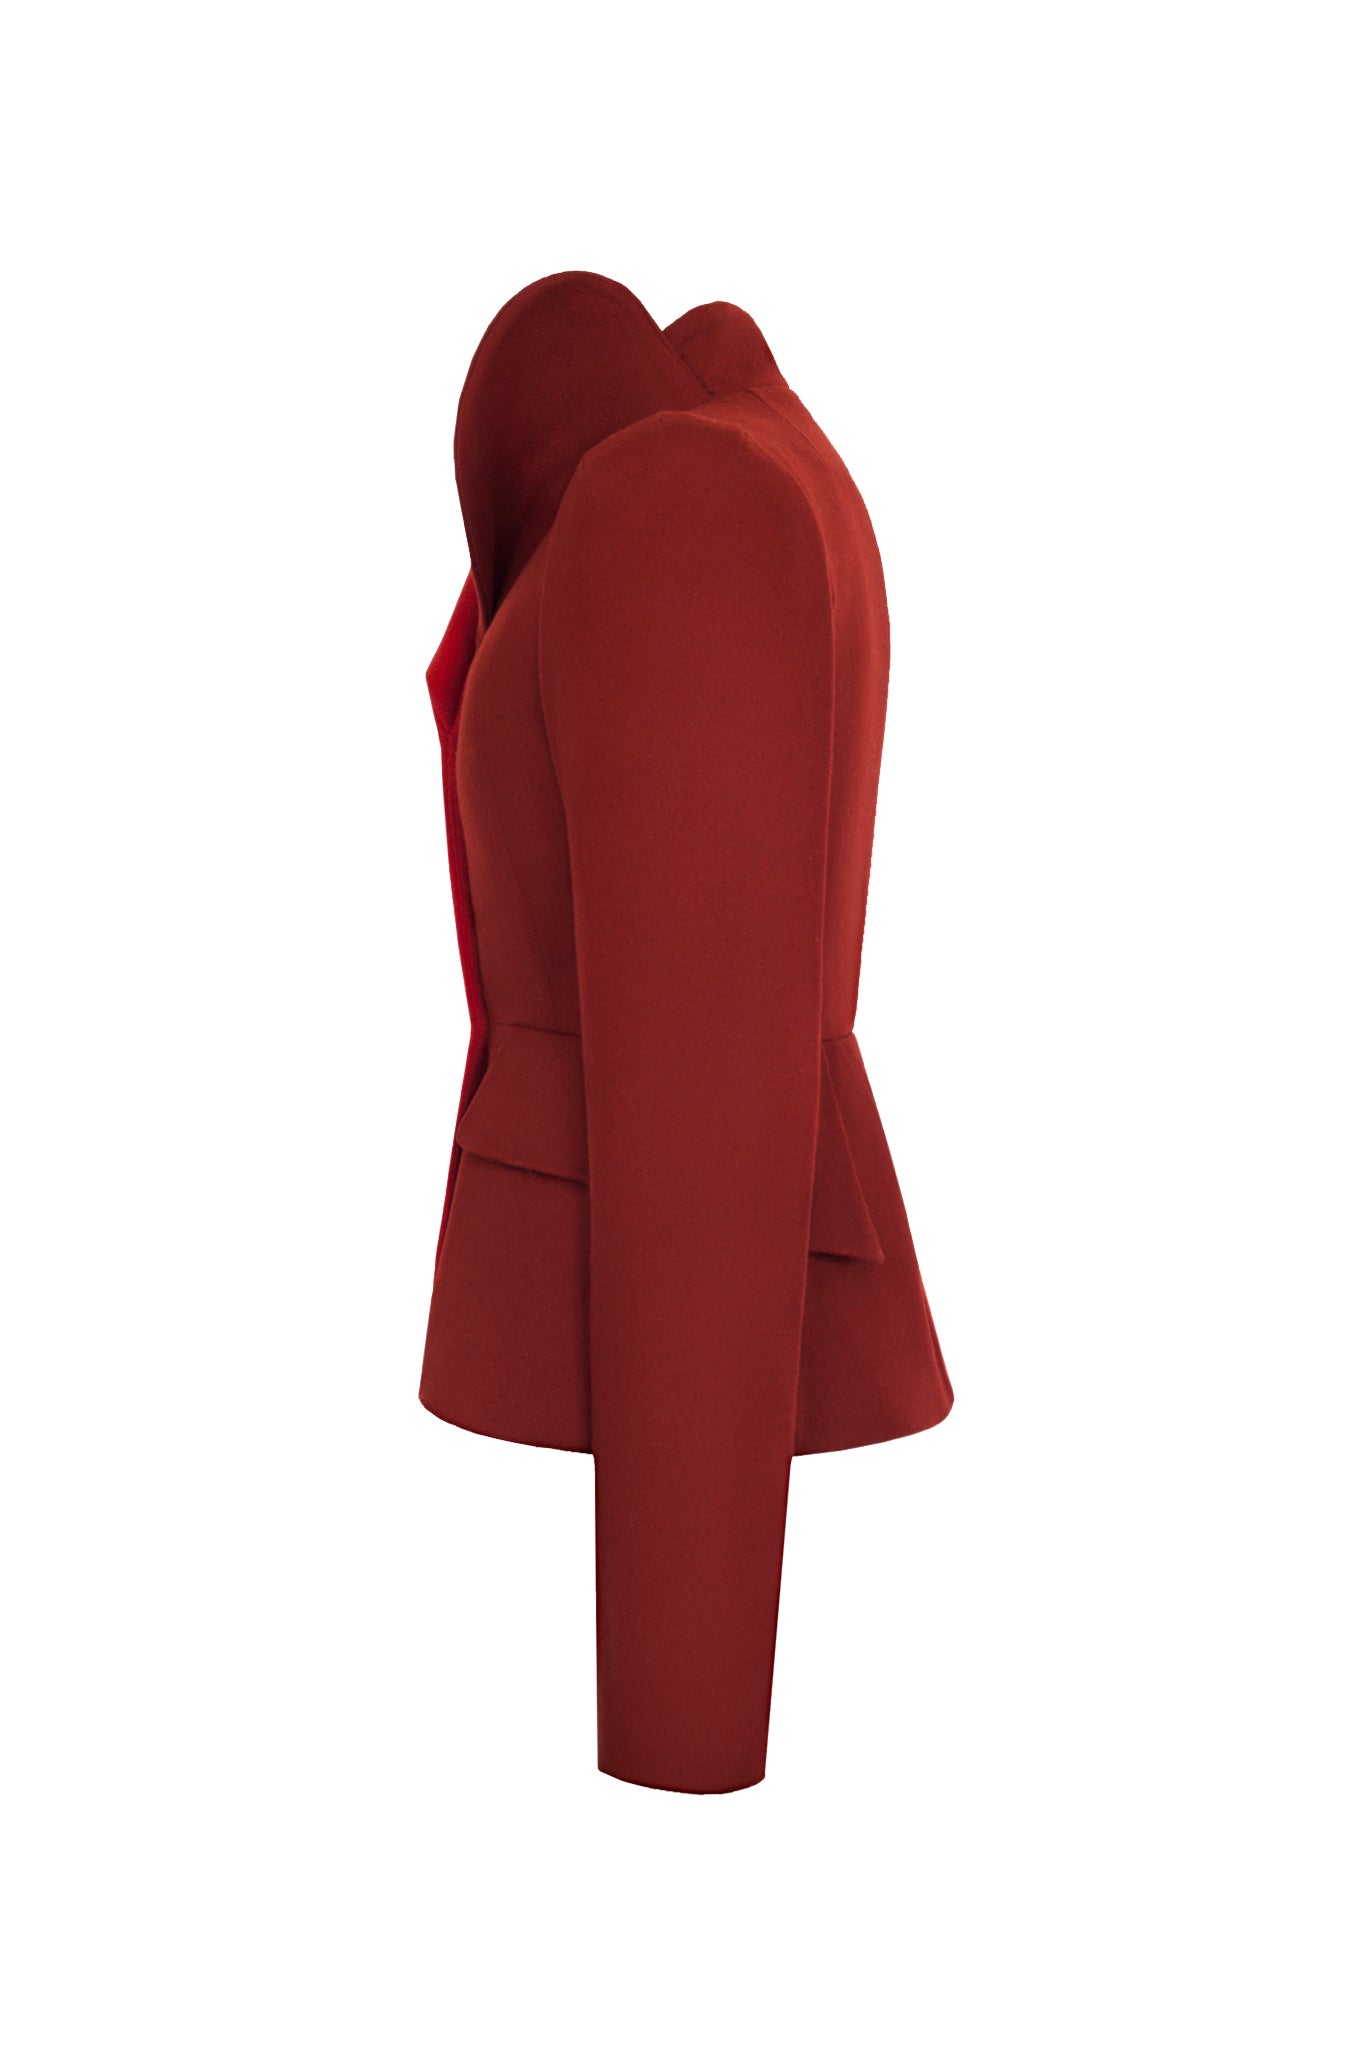 CIMONE's AW17 Dietrich jacket. Named after Marlene! This sculptural tailored and fitted suit jacket is fabricated in two-tone  red and burnt orange wool. 